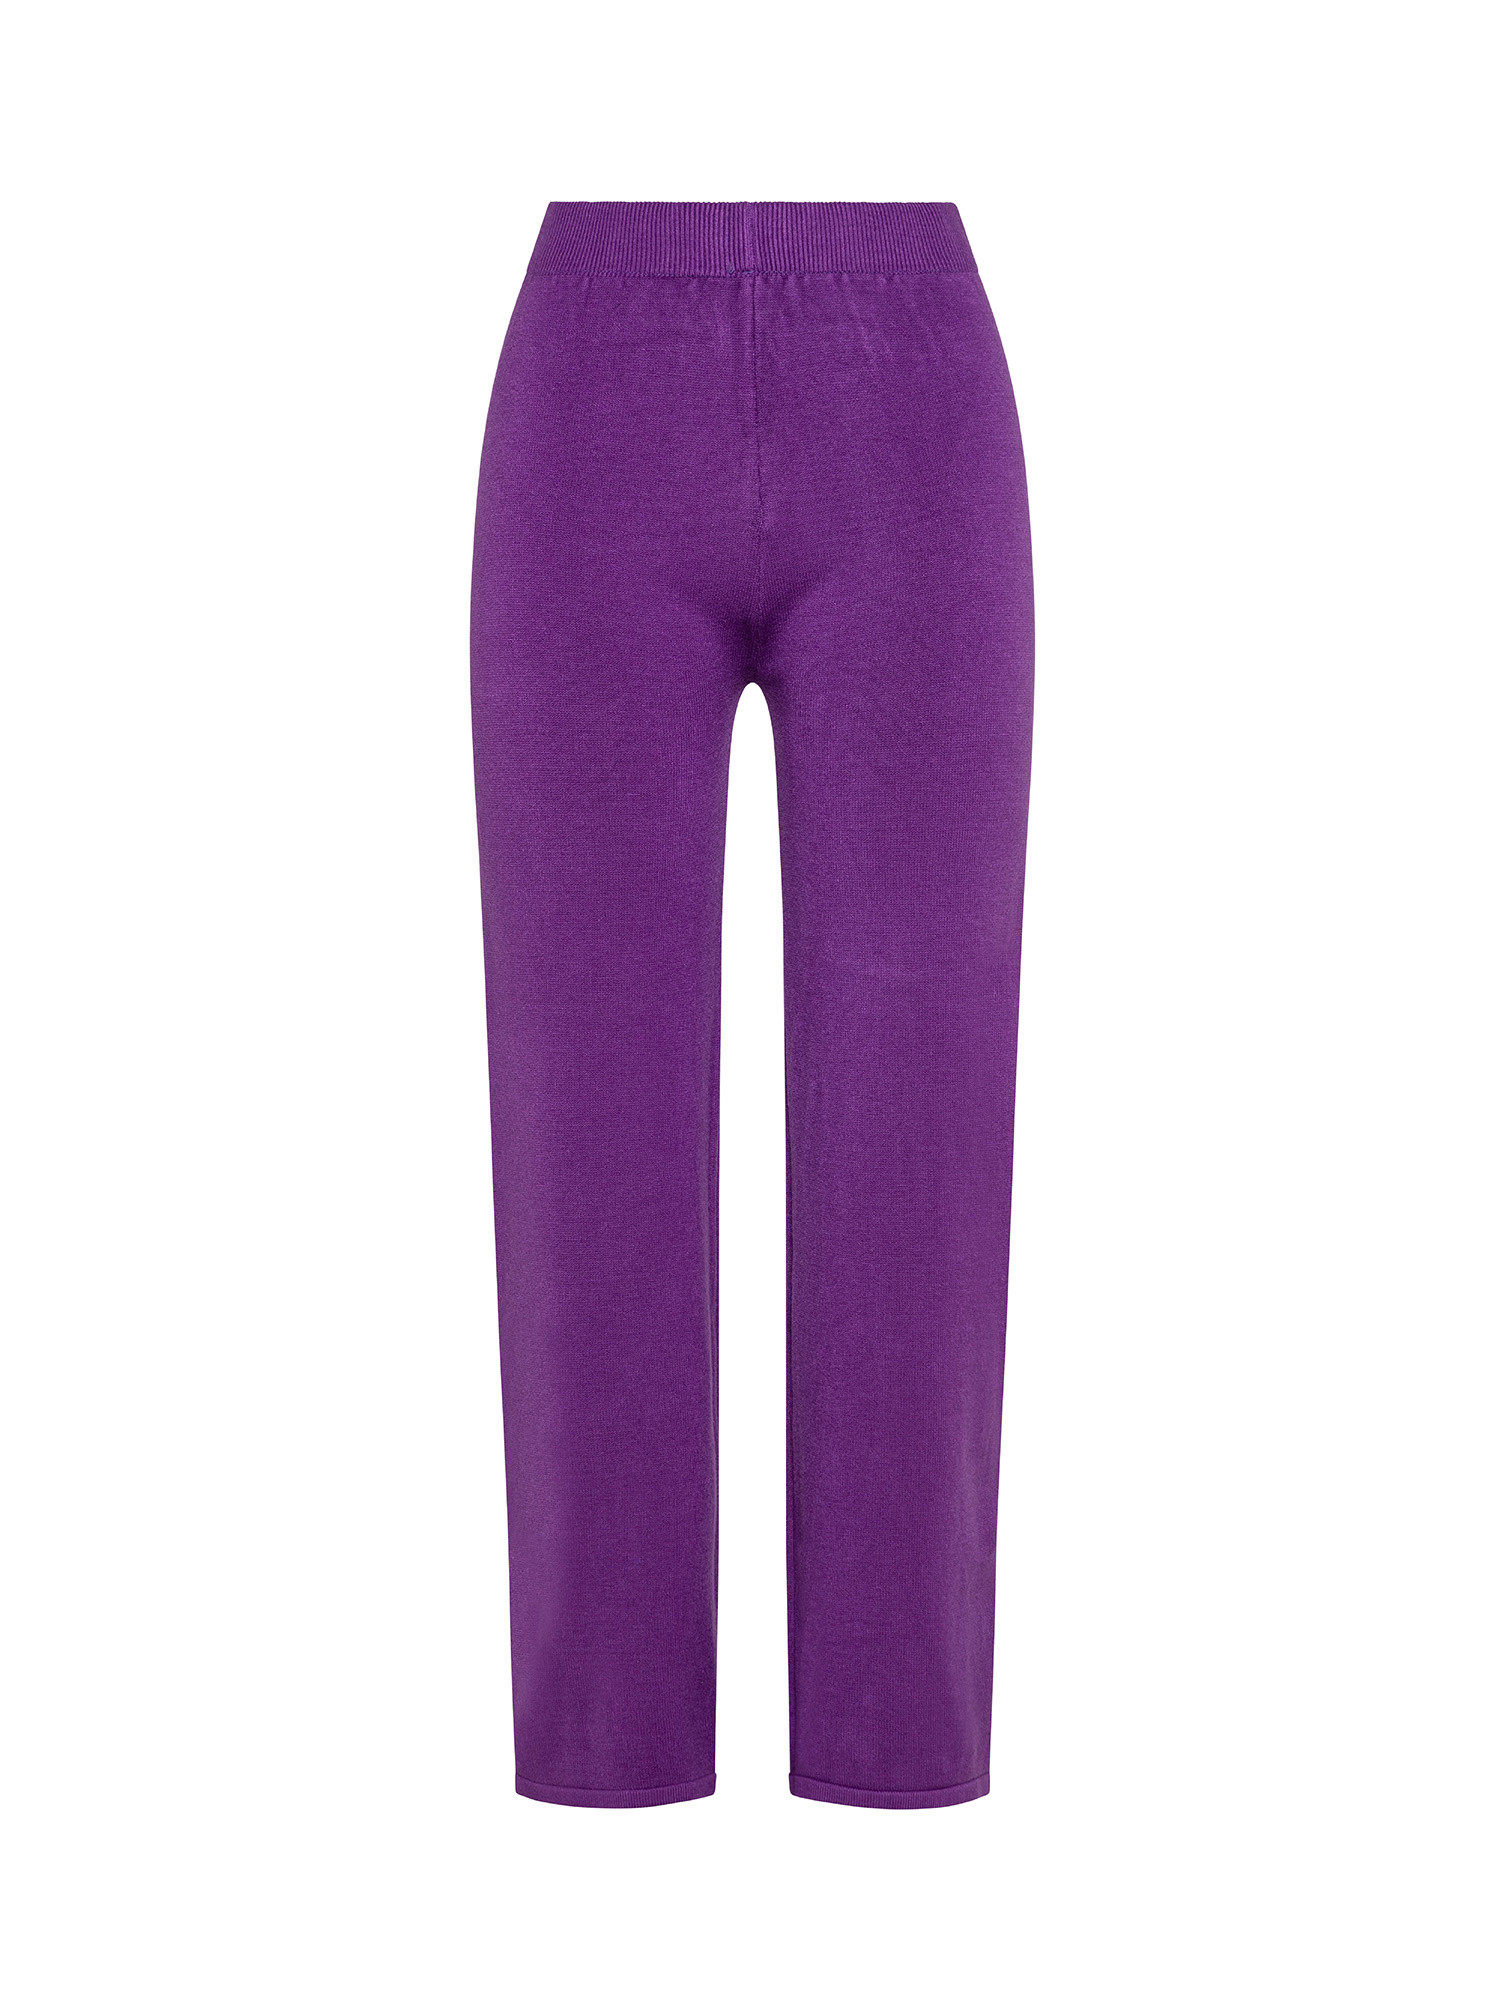 K Collection - Trousers, Purple, large image number 0